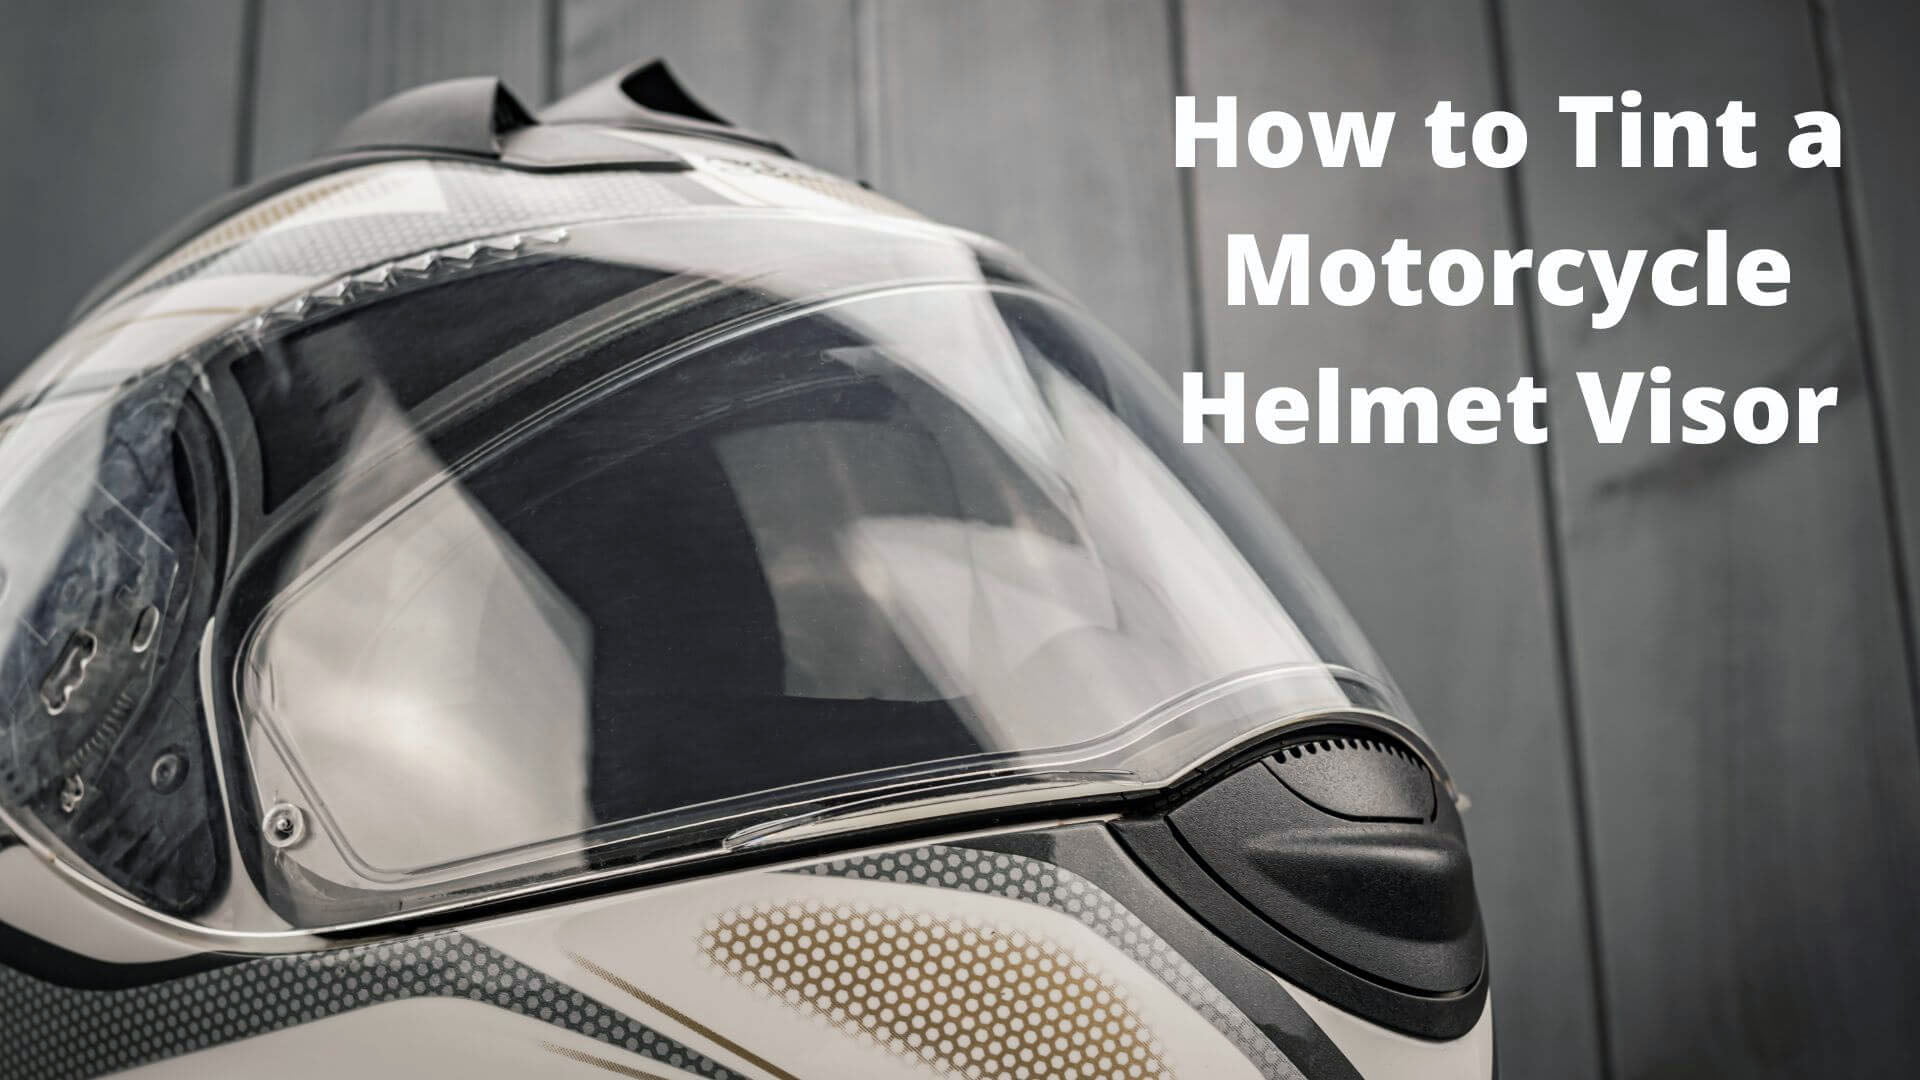 How to Tint a Motorcycle Helmet Visor Easily And Safely